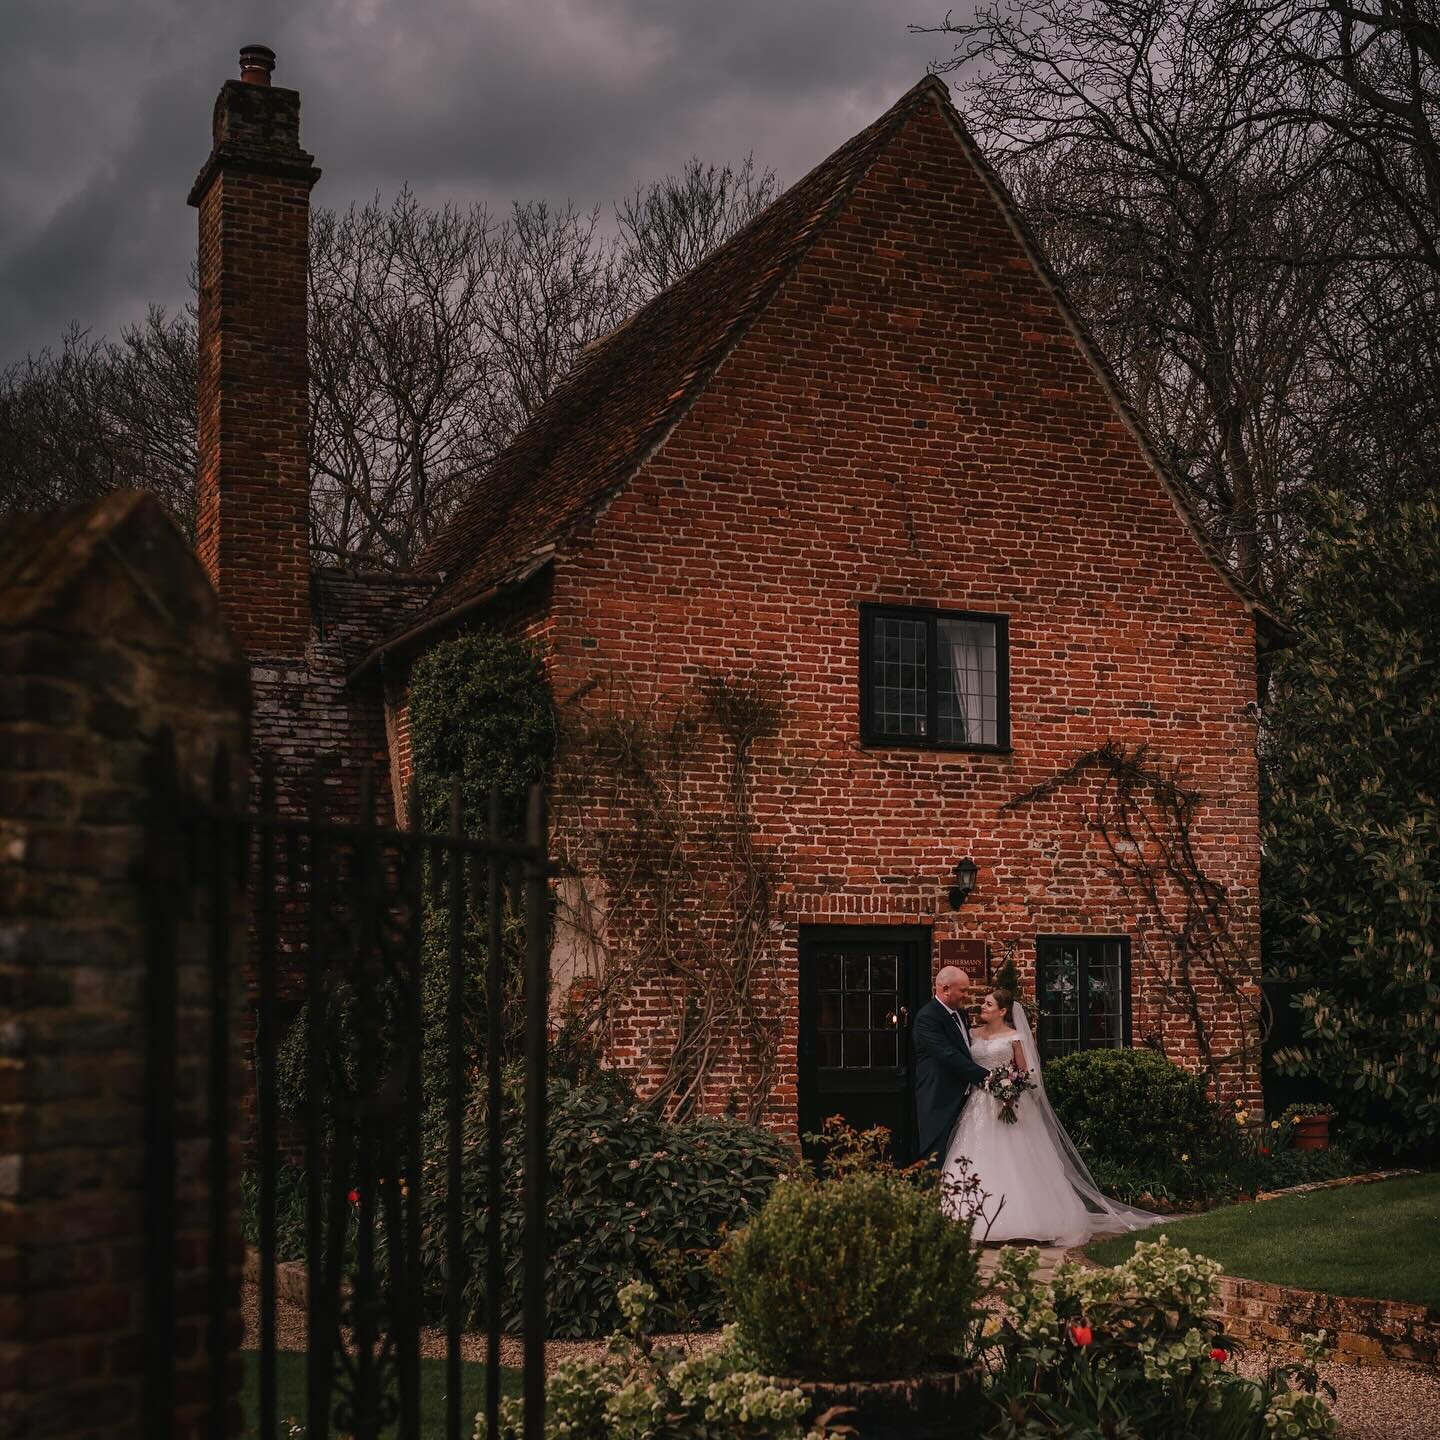 A few snaps from Monday&rsquo;s wedding at @leezprioryweddingvenue 📸 

A cold but lovely spring day for H &amp; L 🖤

SUPPLIERS: 
@leezprioryweddingvenue 
@a_whitewedding 
@keriannrosshairandbeauty 

#essexwedding #springwedding #leezpriory #leezpri